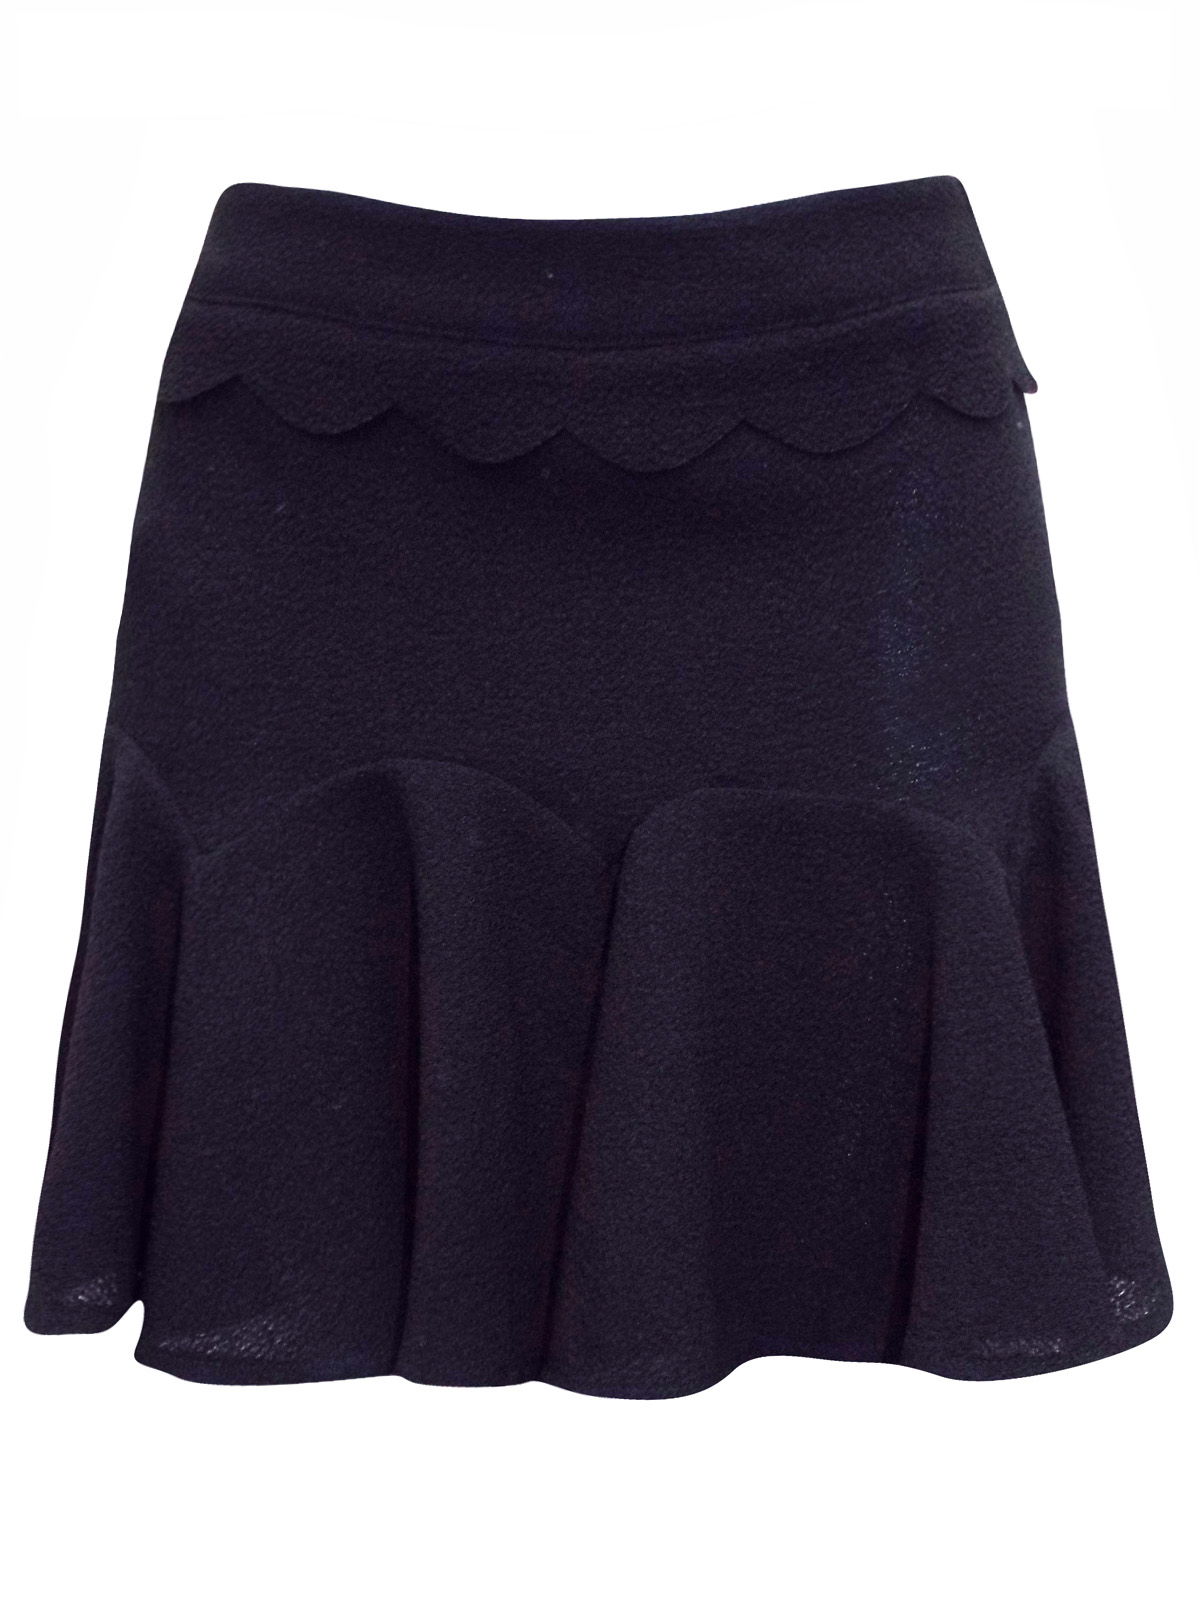 ASSORTED Ladies Skirts - Size 10 to 18